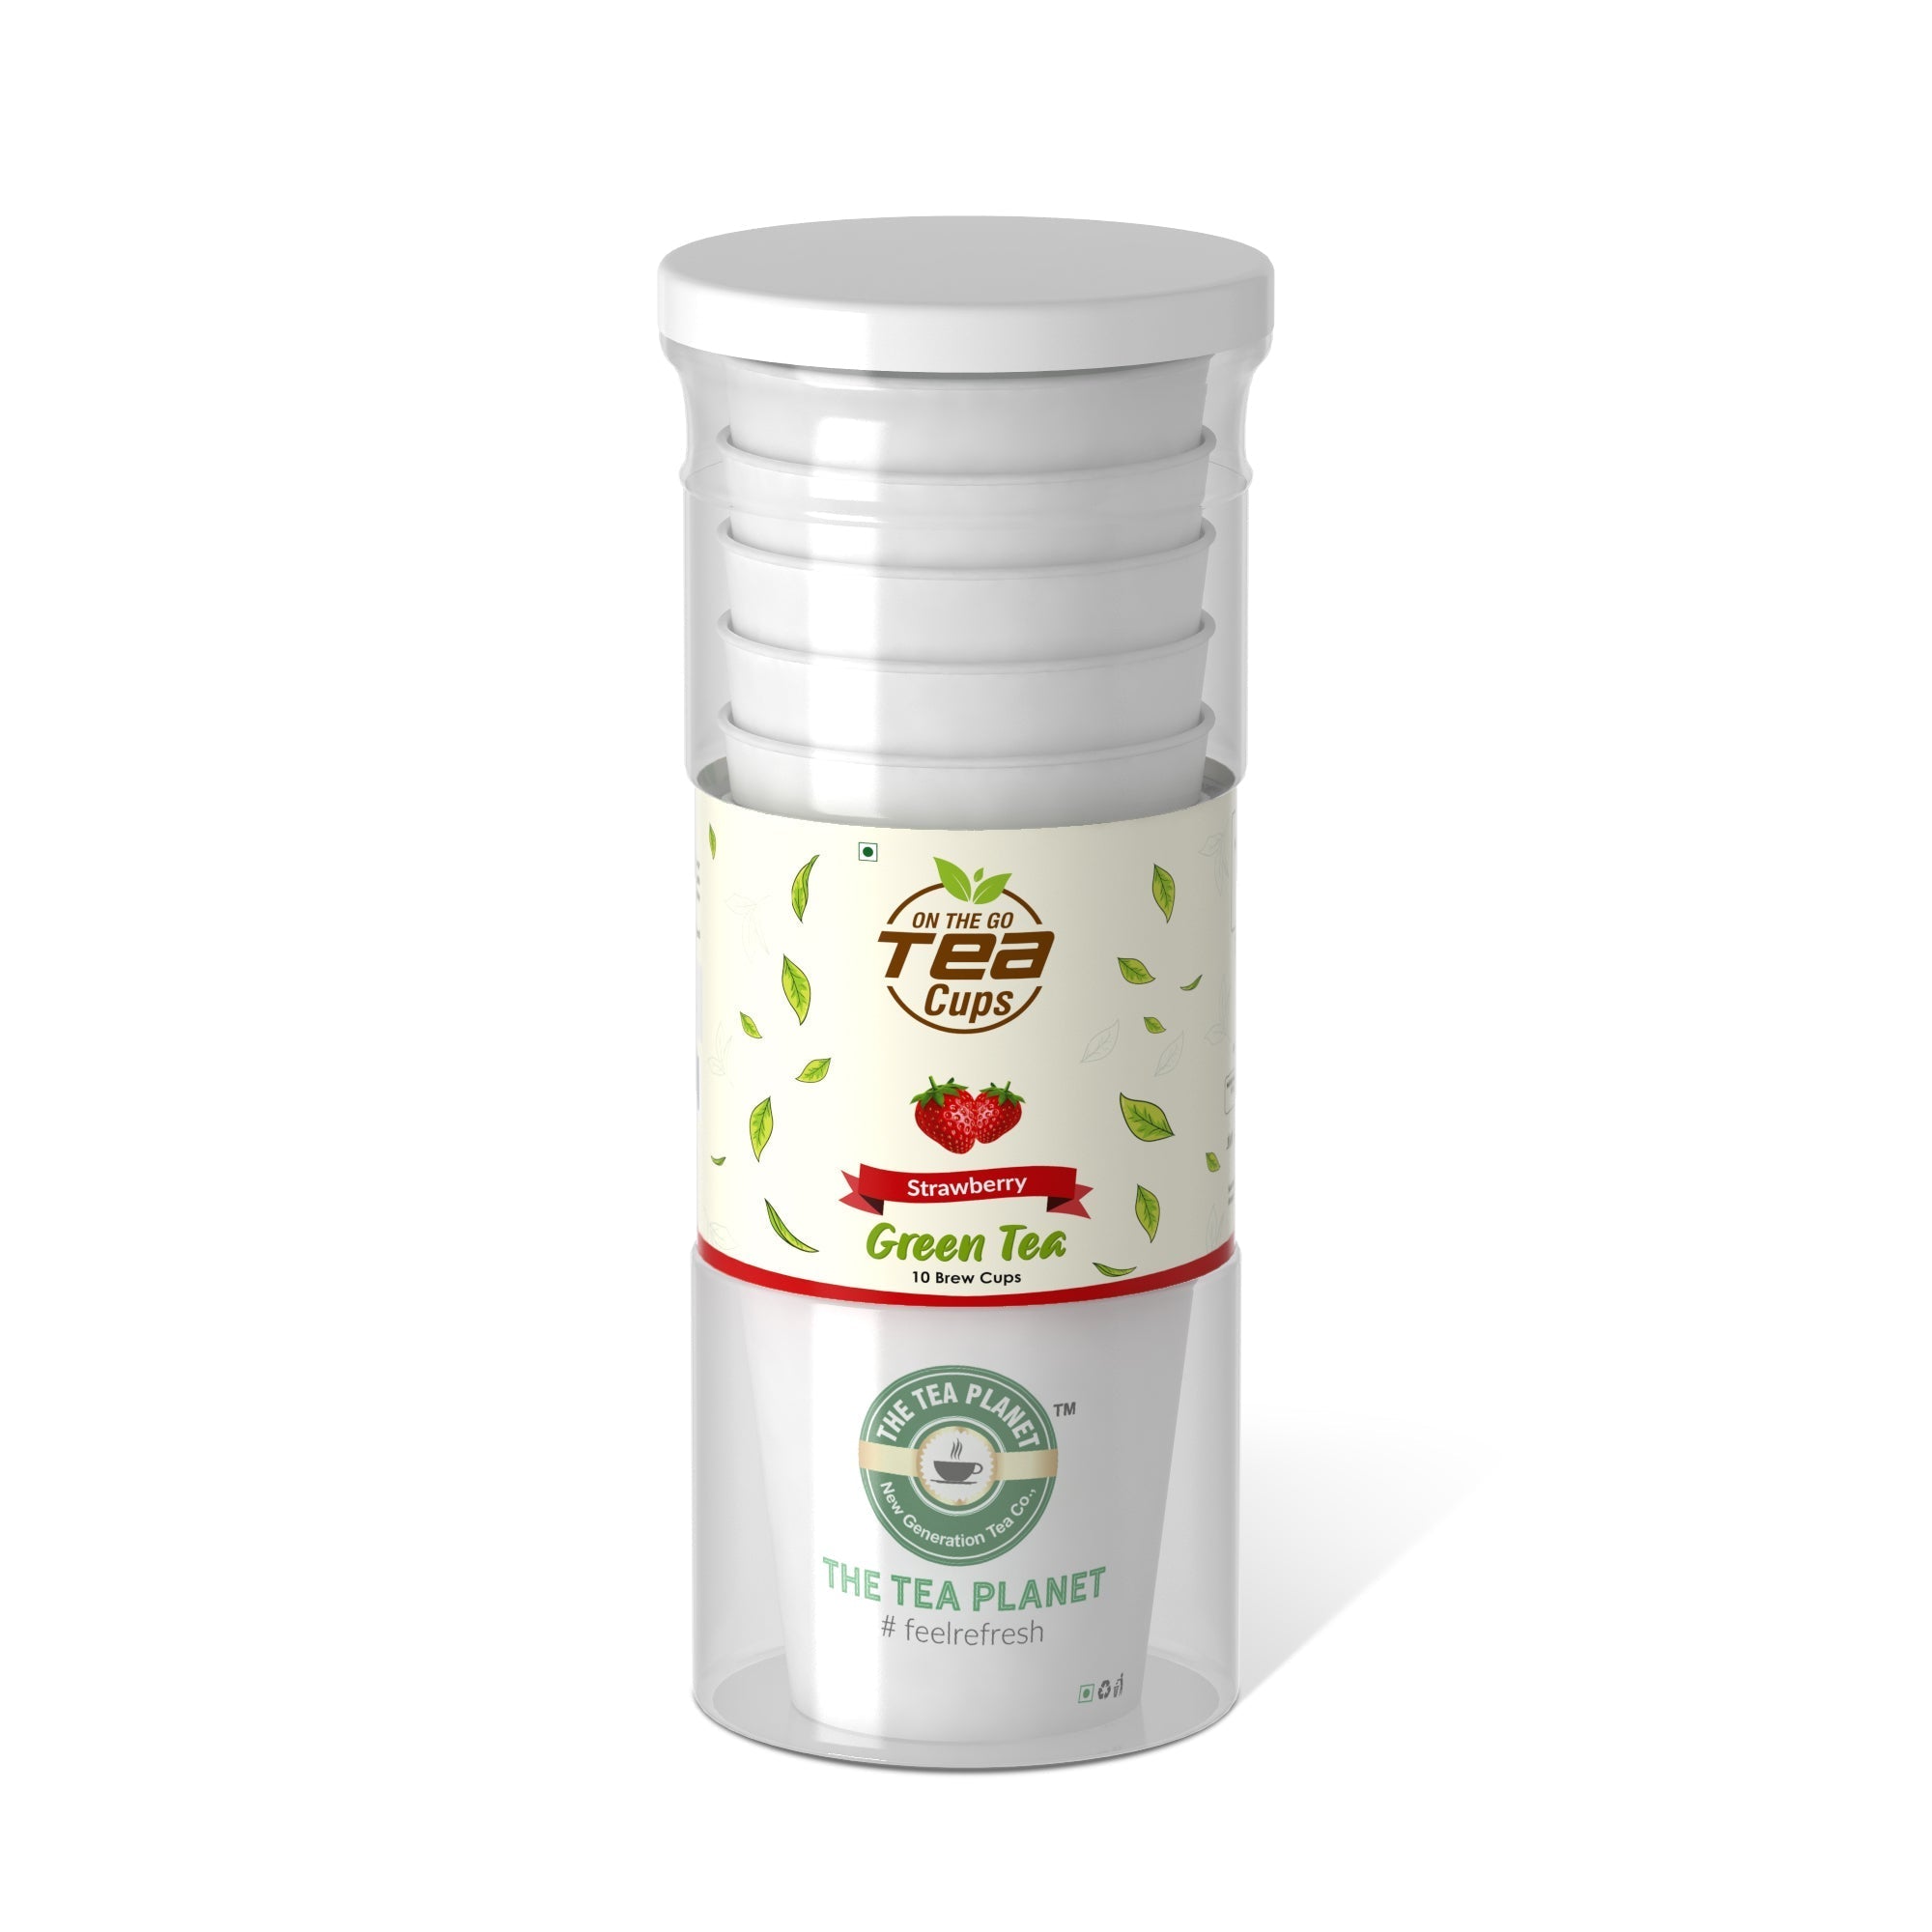 Strawberry Instant Green Tea Brew Cup - 20 cups